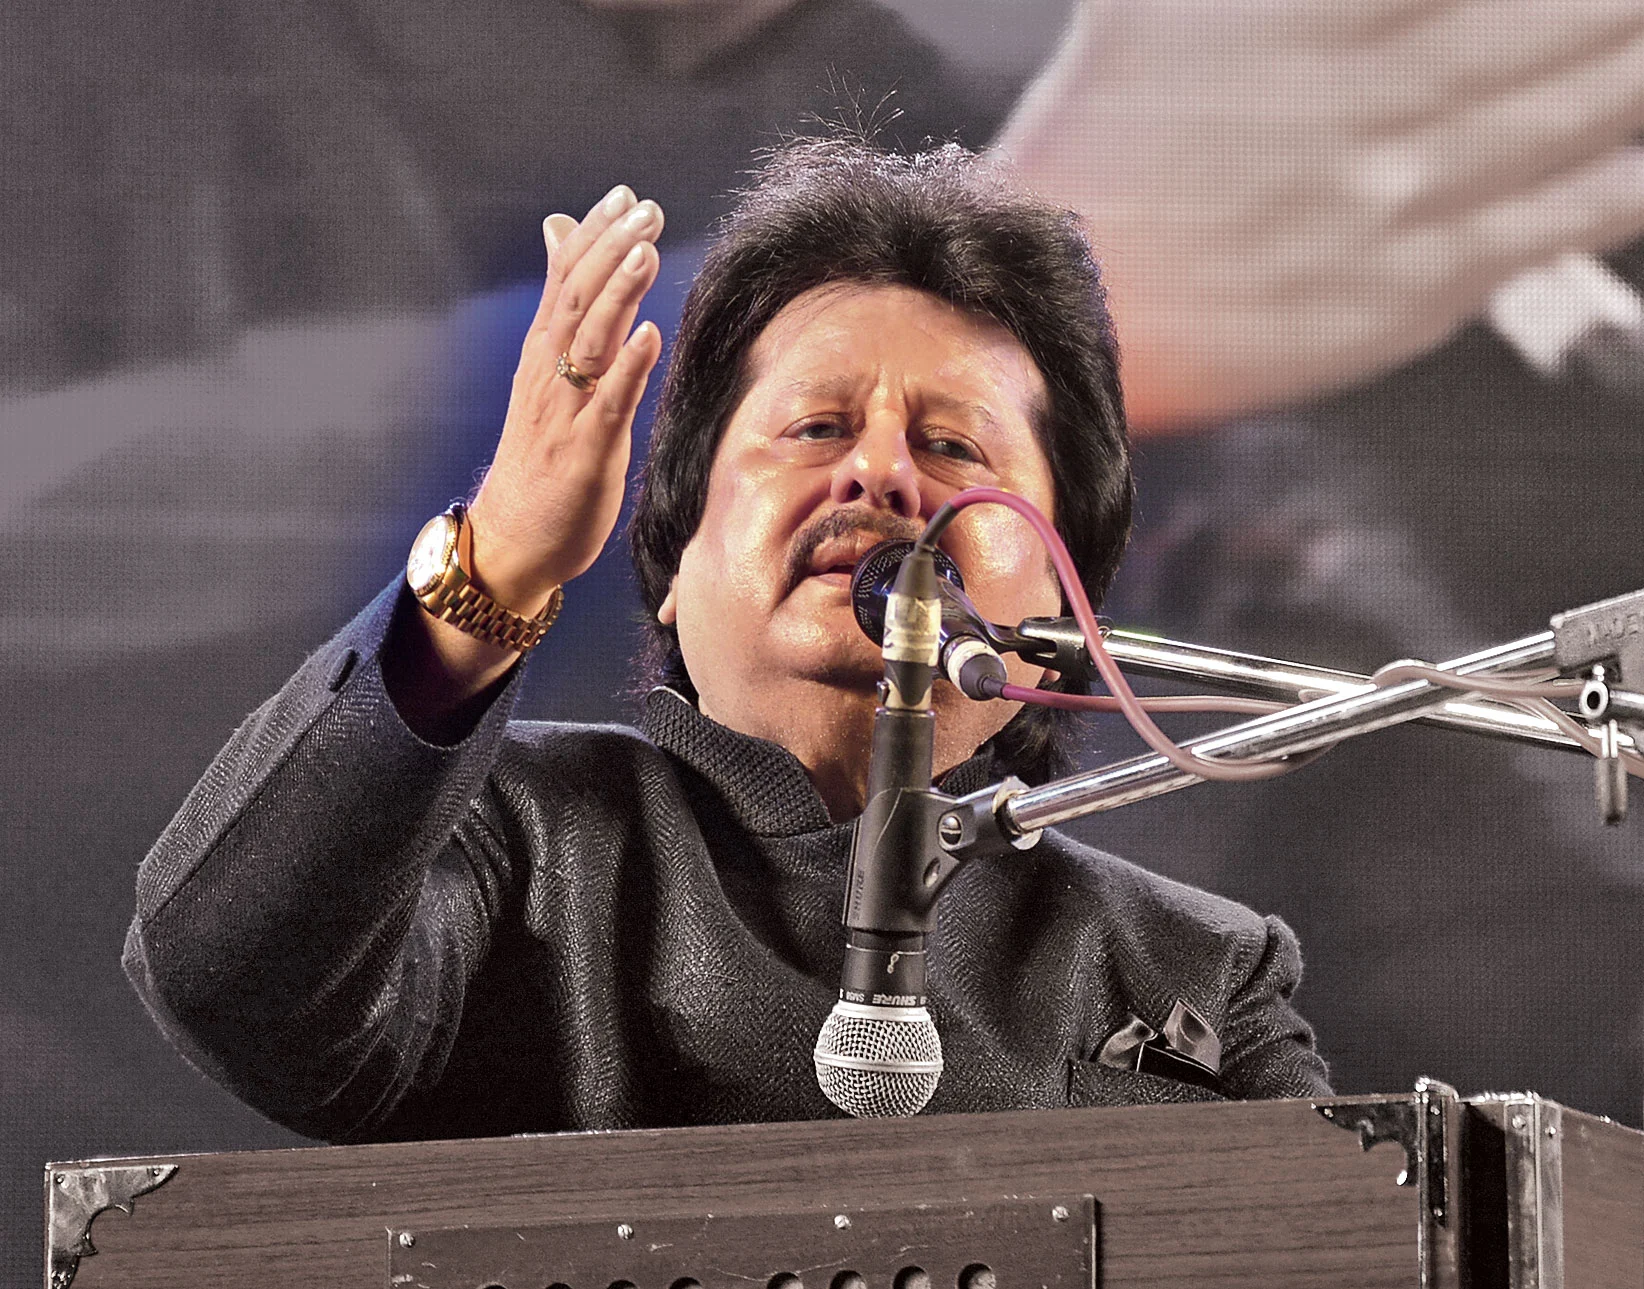 A collection of Pankaj Udhas's most famous ghazal albums displayed together.